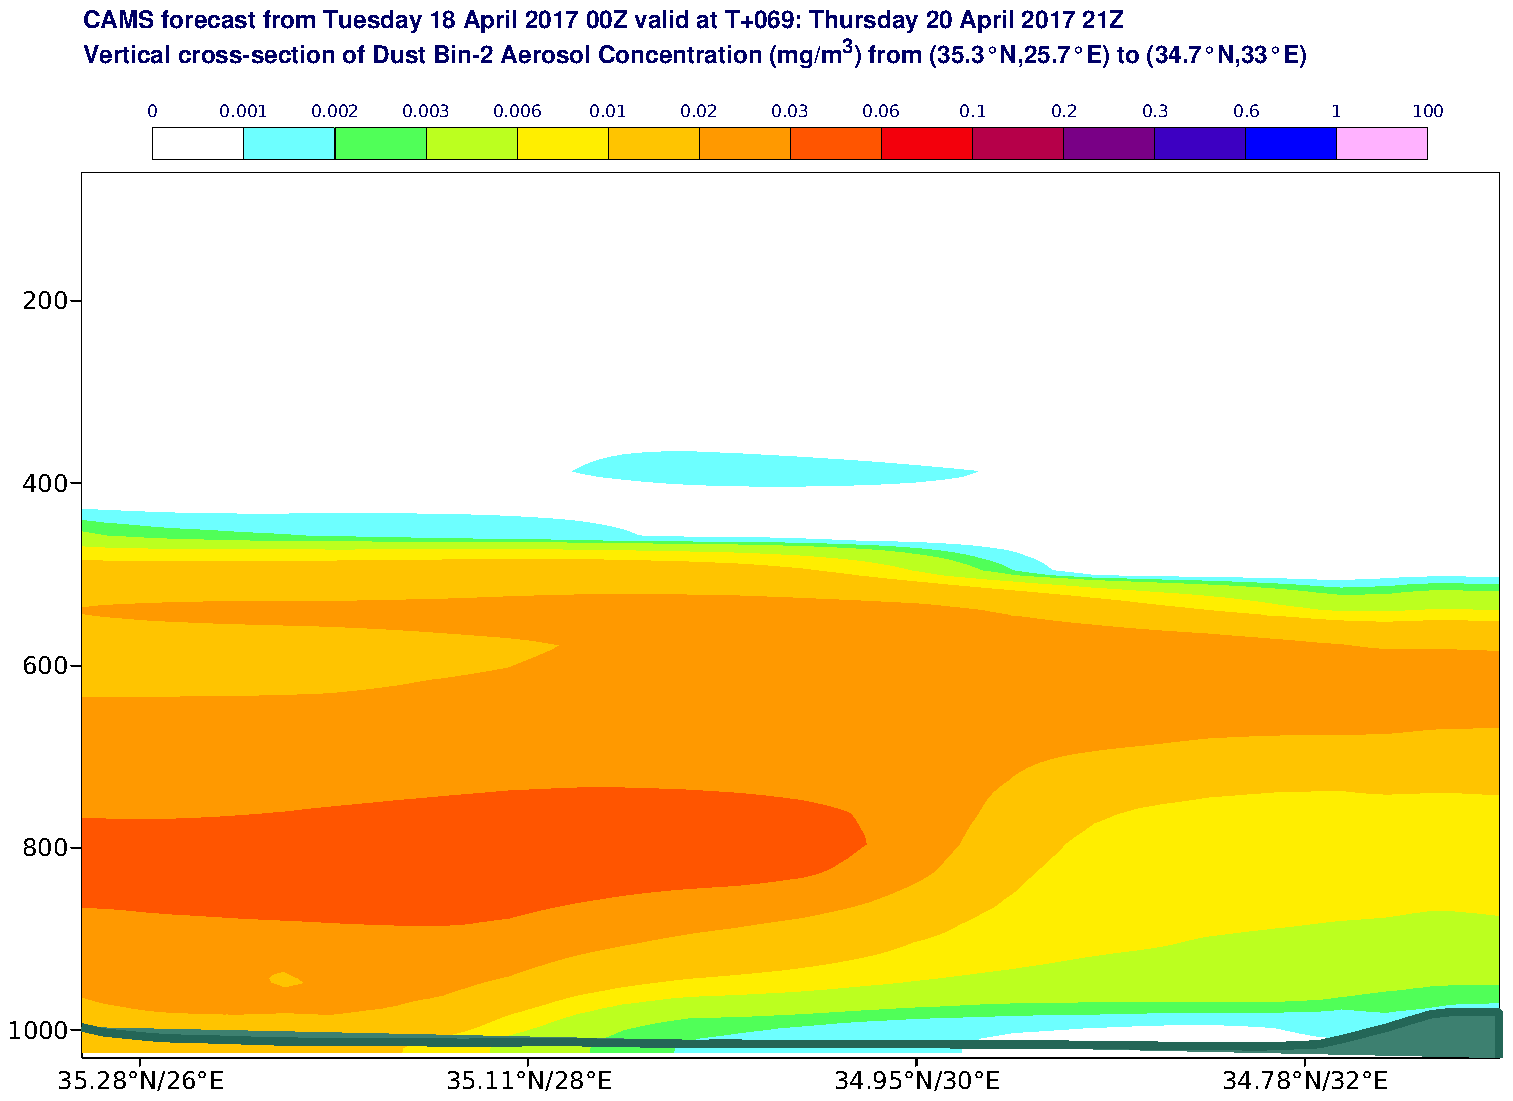 Vertical cross-section of Dust Bin-2 Aerosol Concentration (mg/m3) valid at T69 - 2017-04-20 21:00